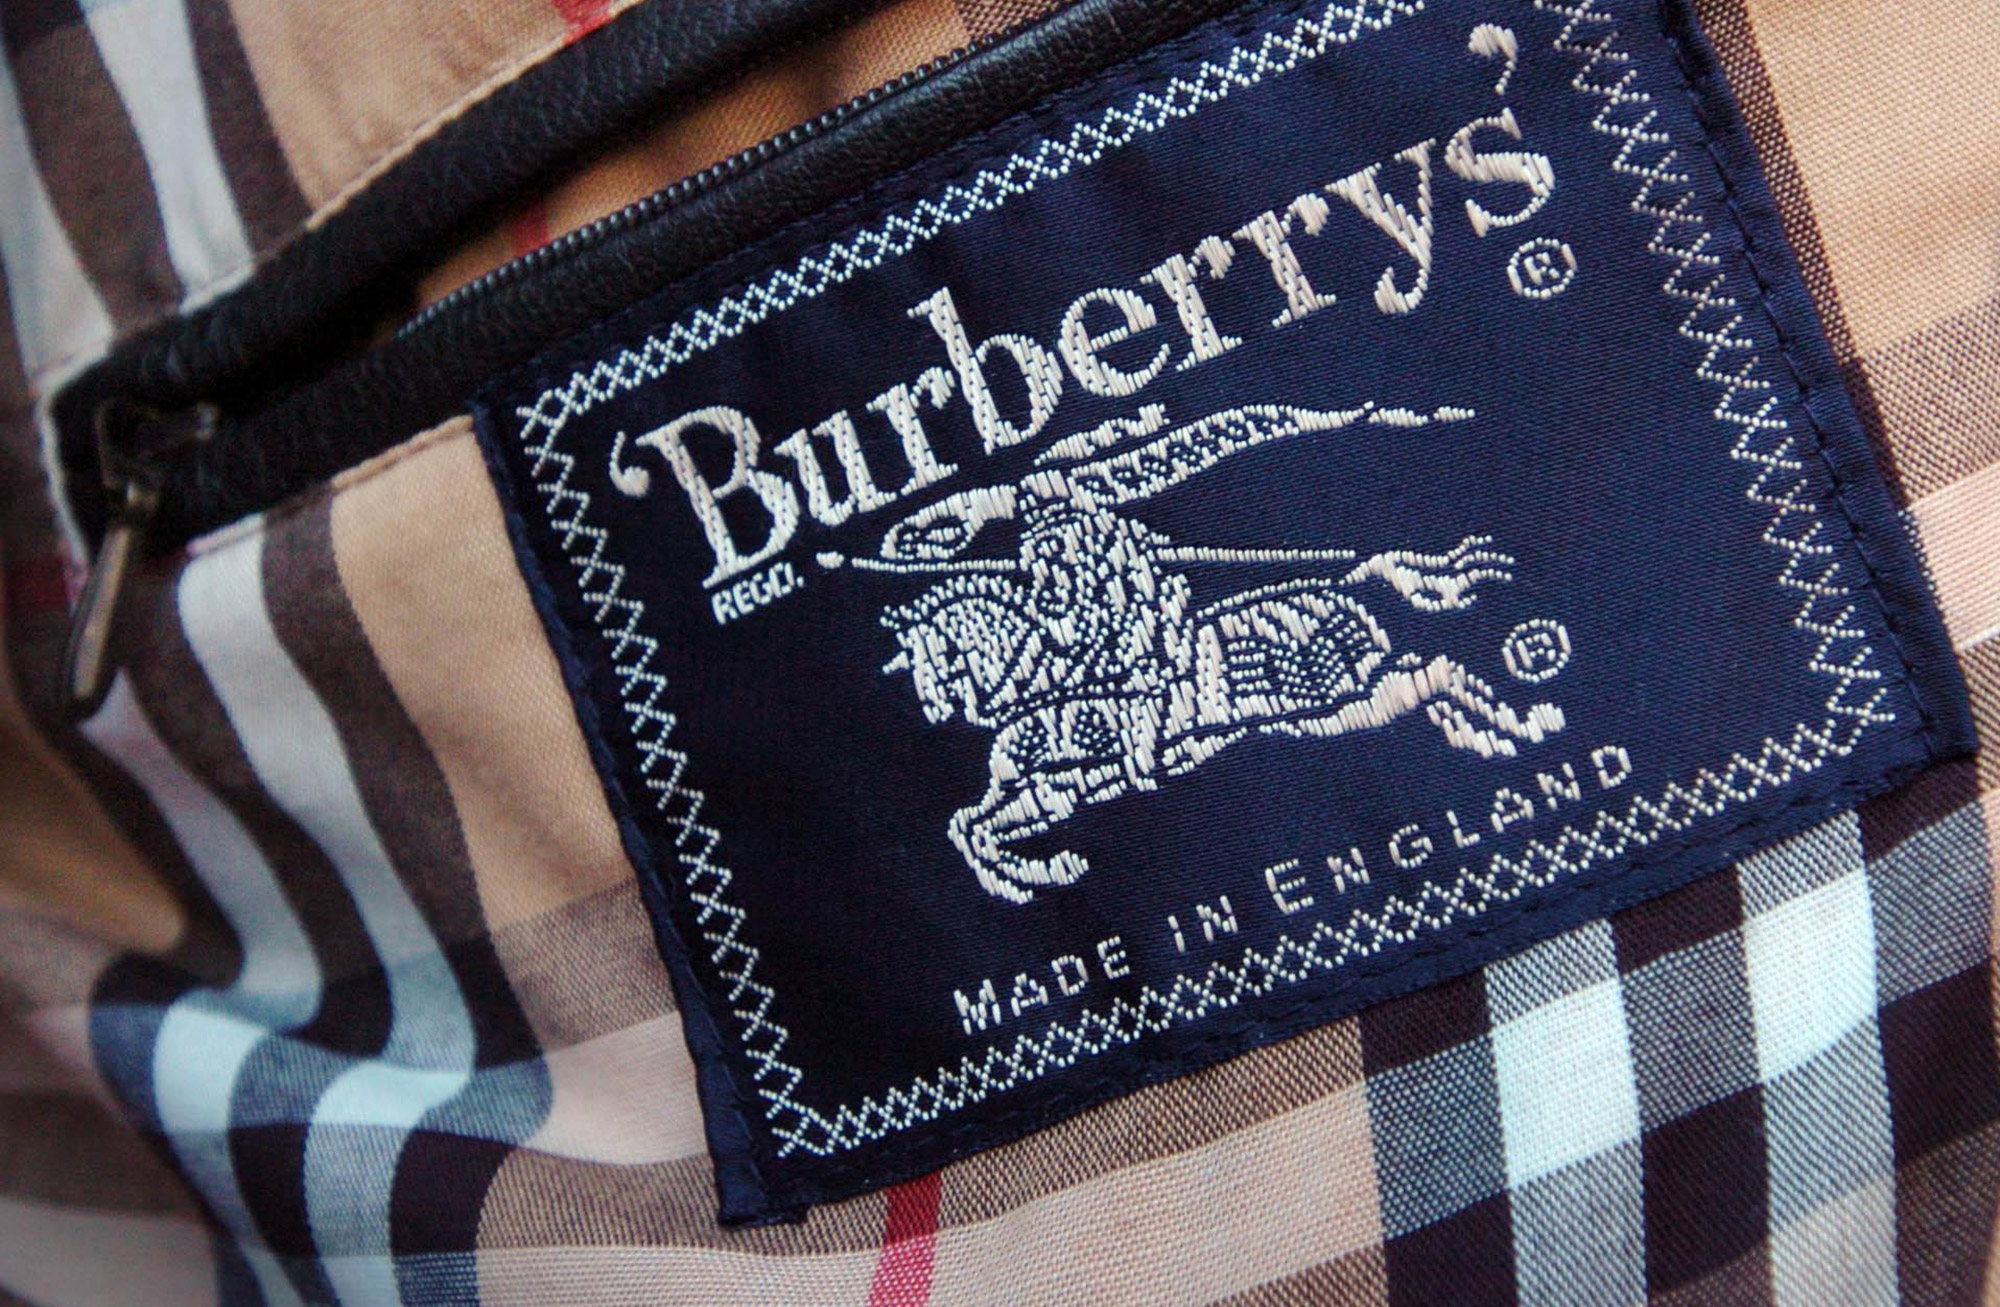 Sell Old Burberry Online and the Brand 